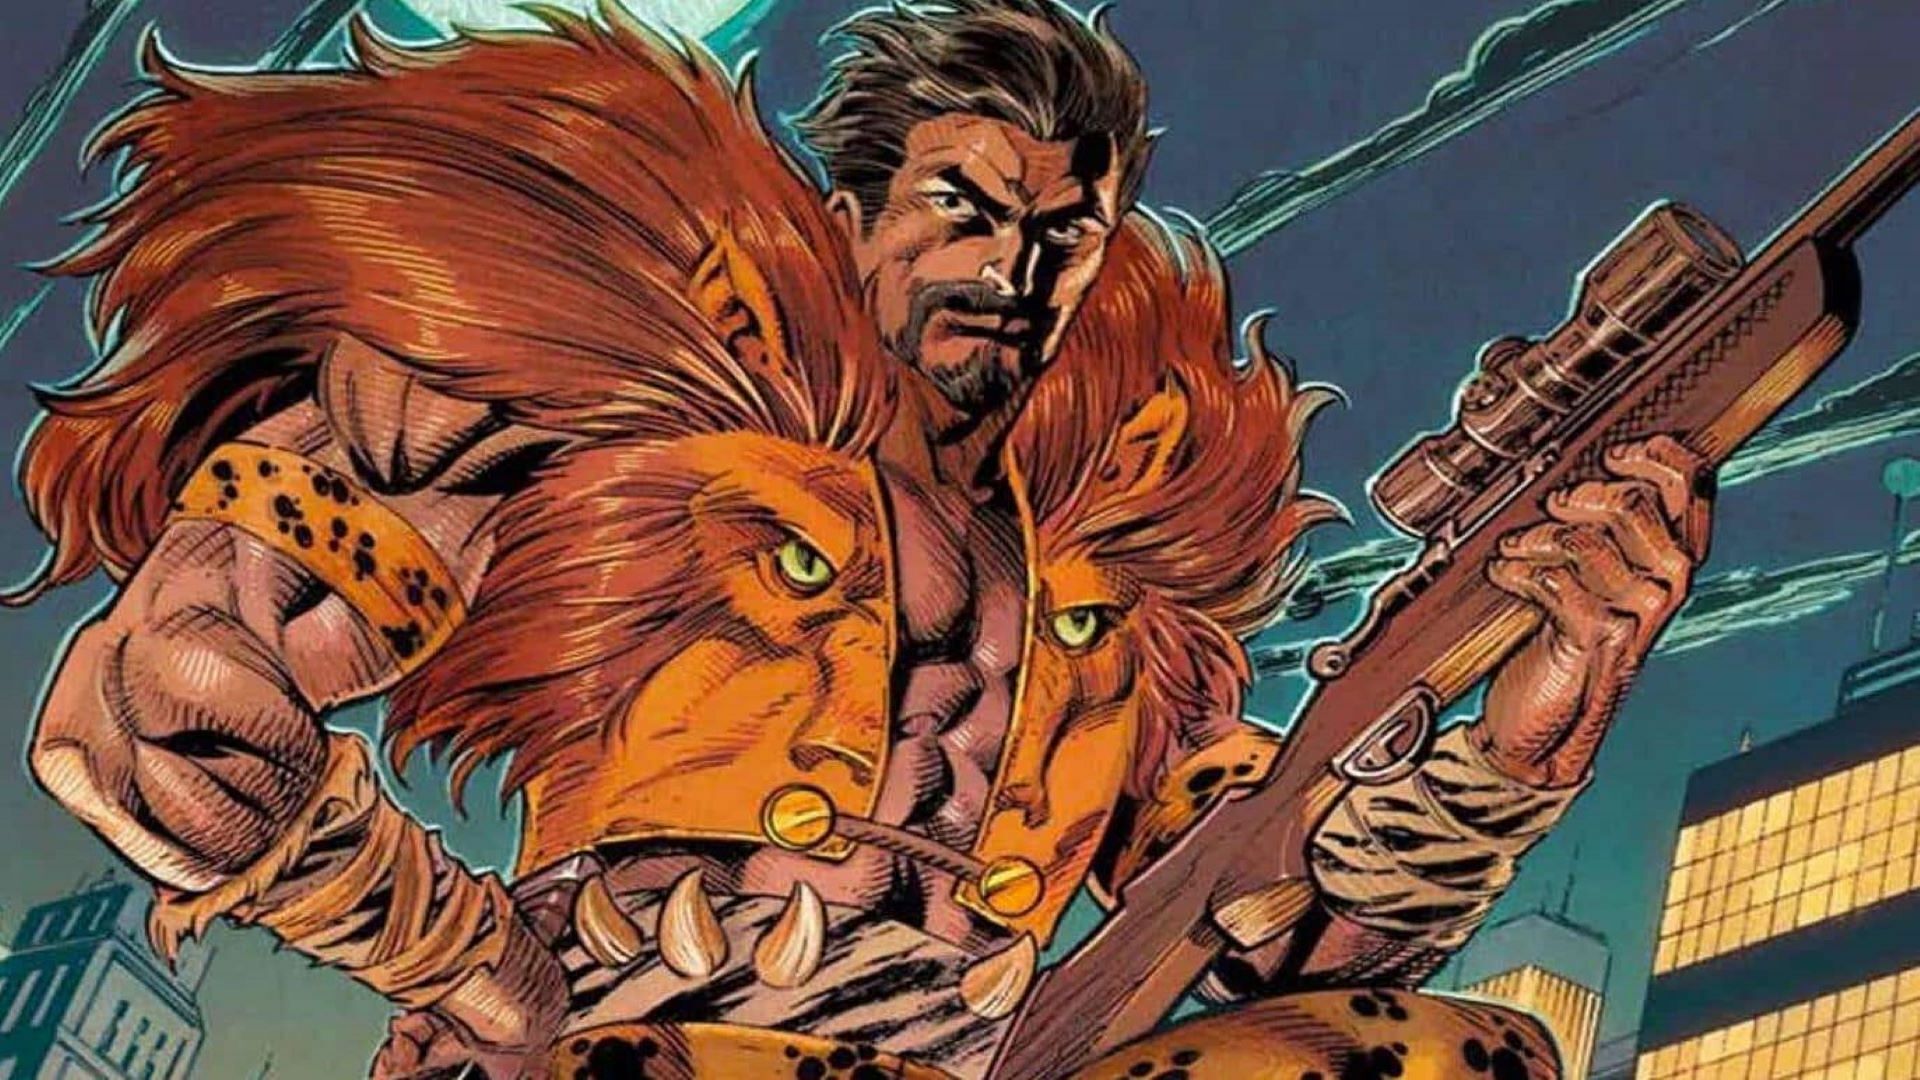 Kraven the Hunter: New Description of R-Rated Action in Upcoming Spider-Verse Film